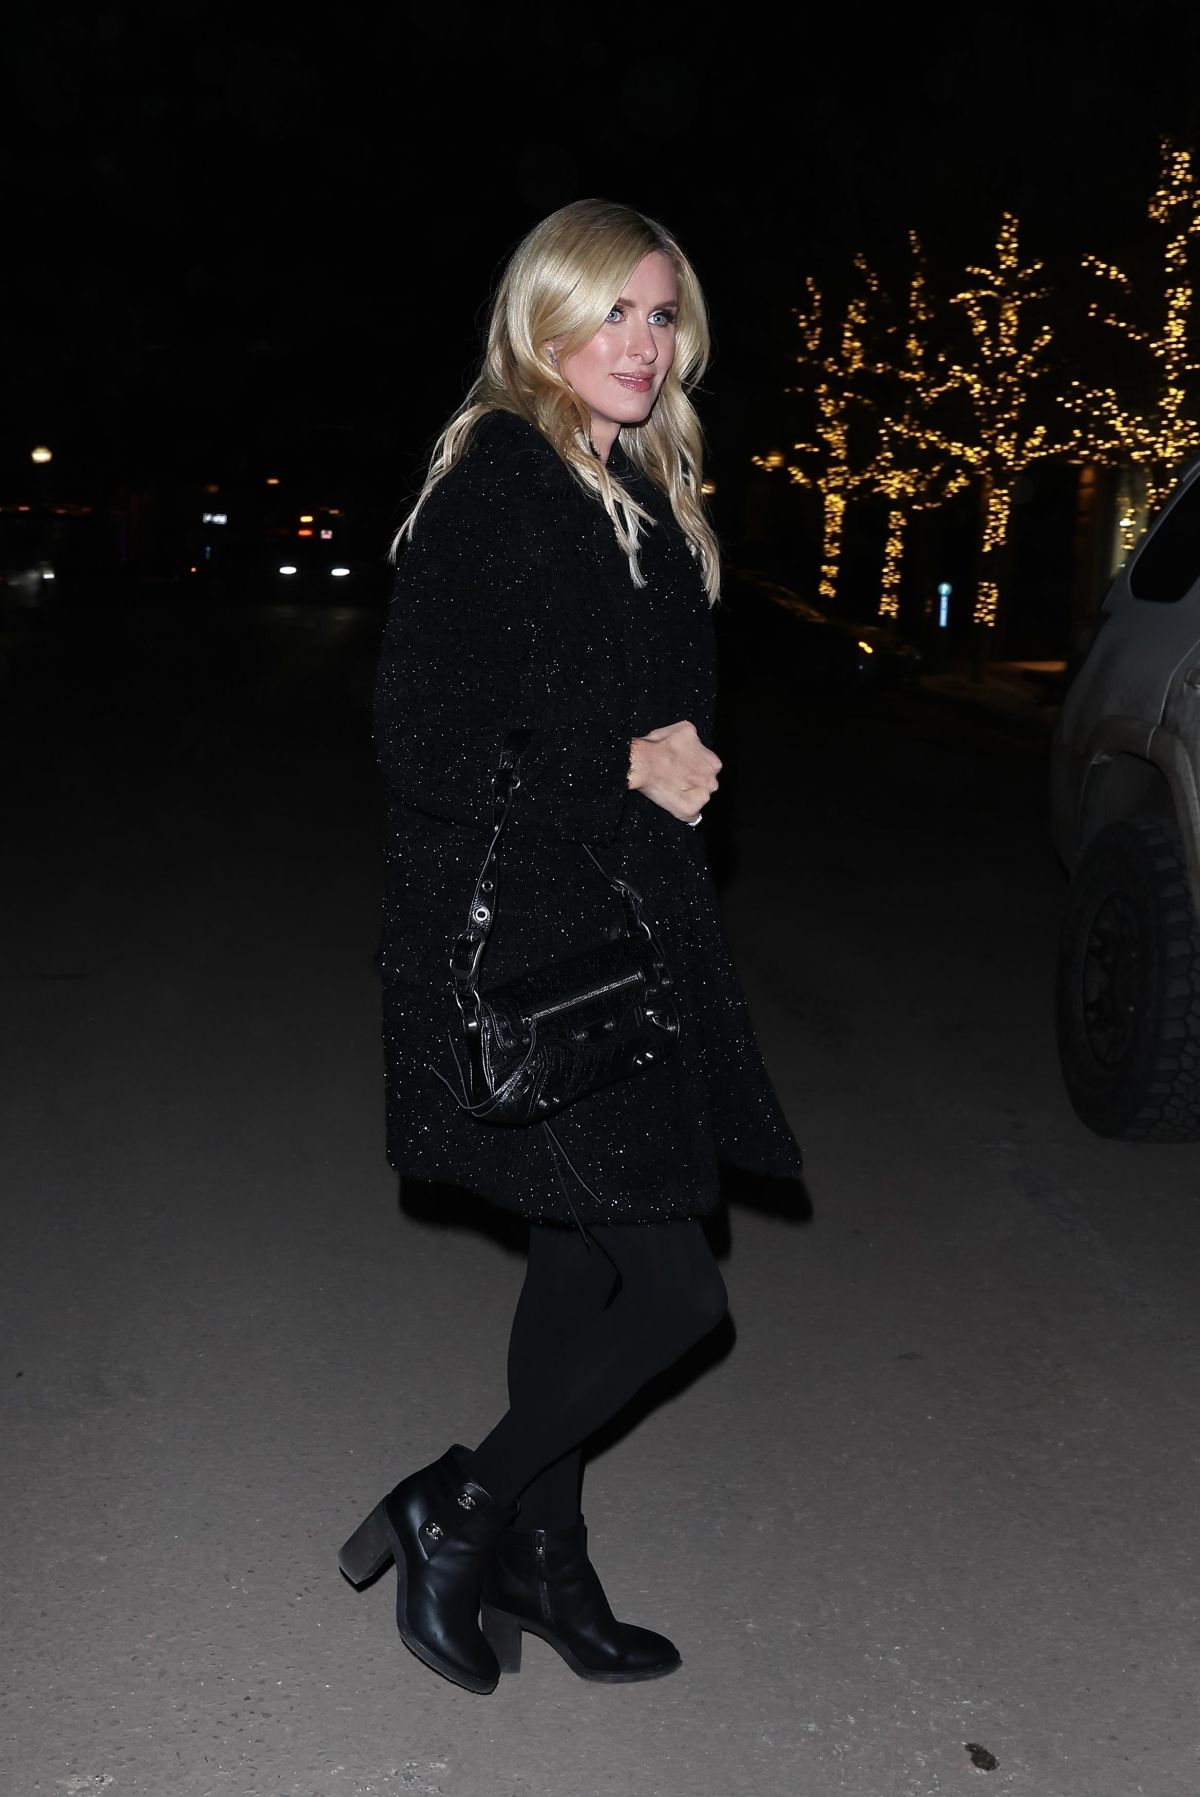 Nicky Hilton in Chic Black Outfit Leaving Kemo Sabe Aspen 2